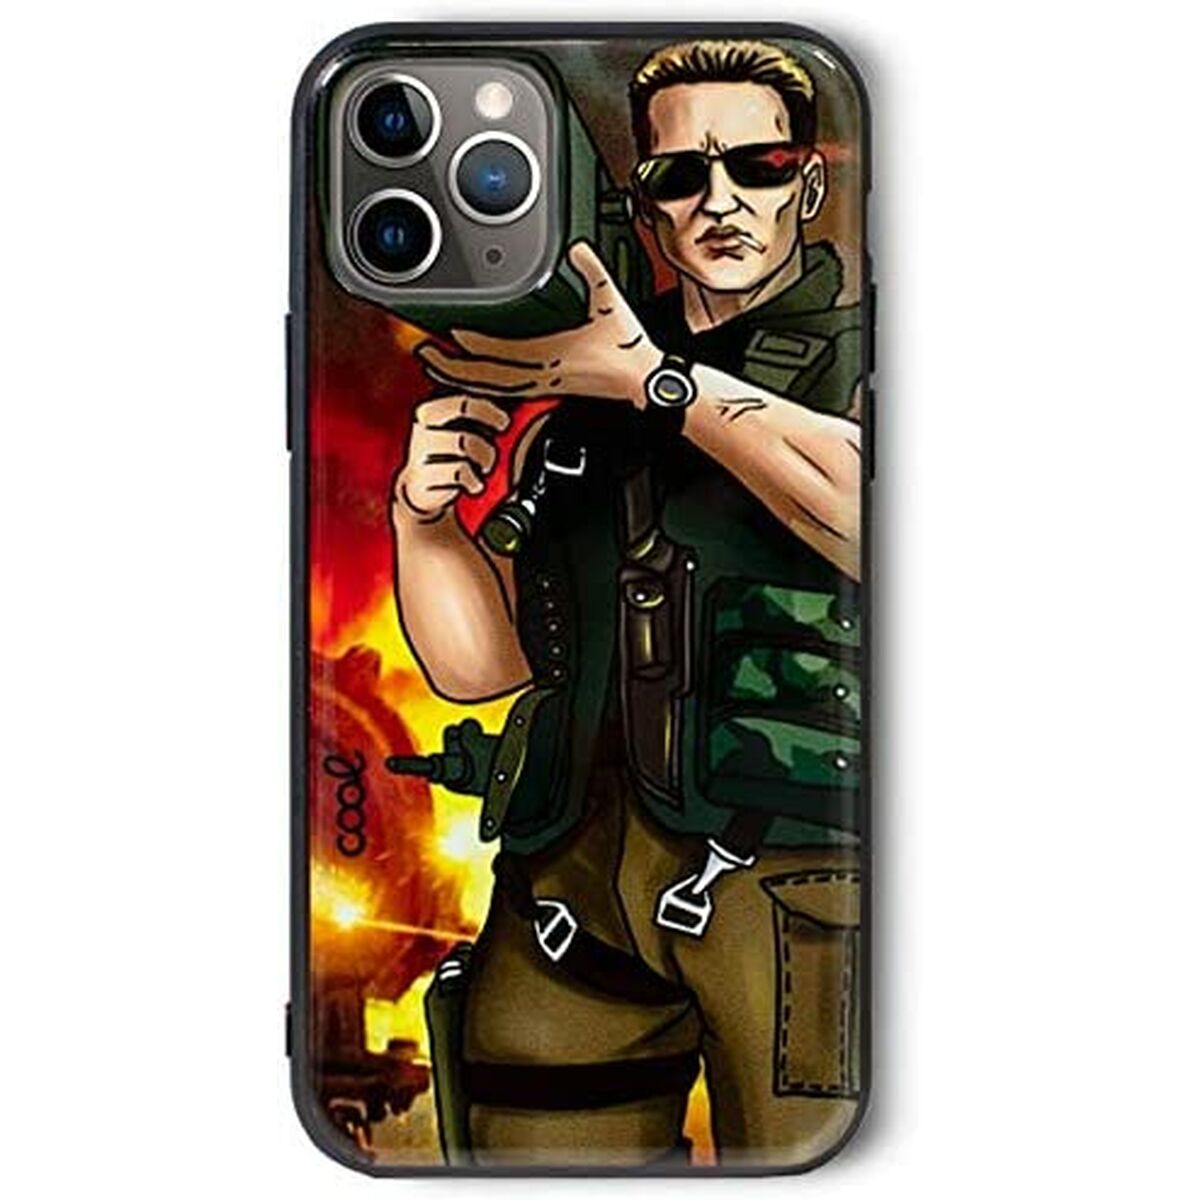 Mobile cover Cool Drawings Bazoka iPhone 11 Pro